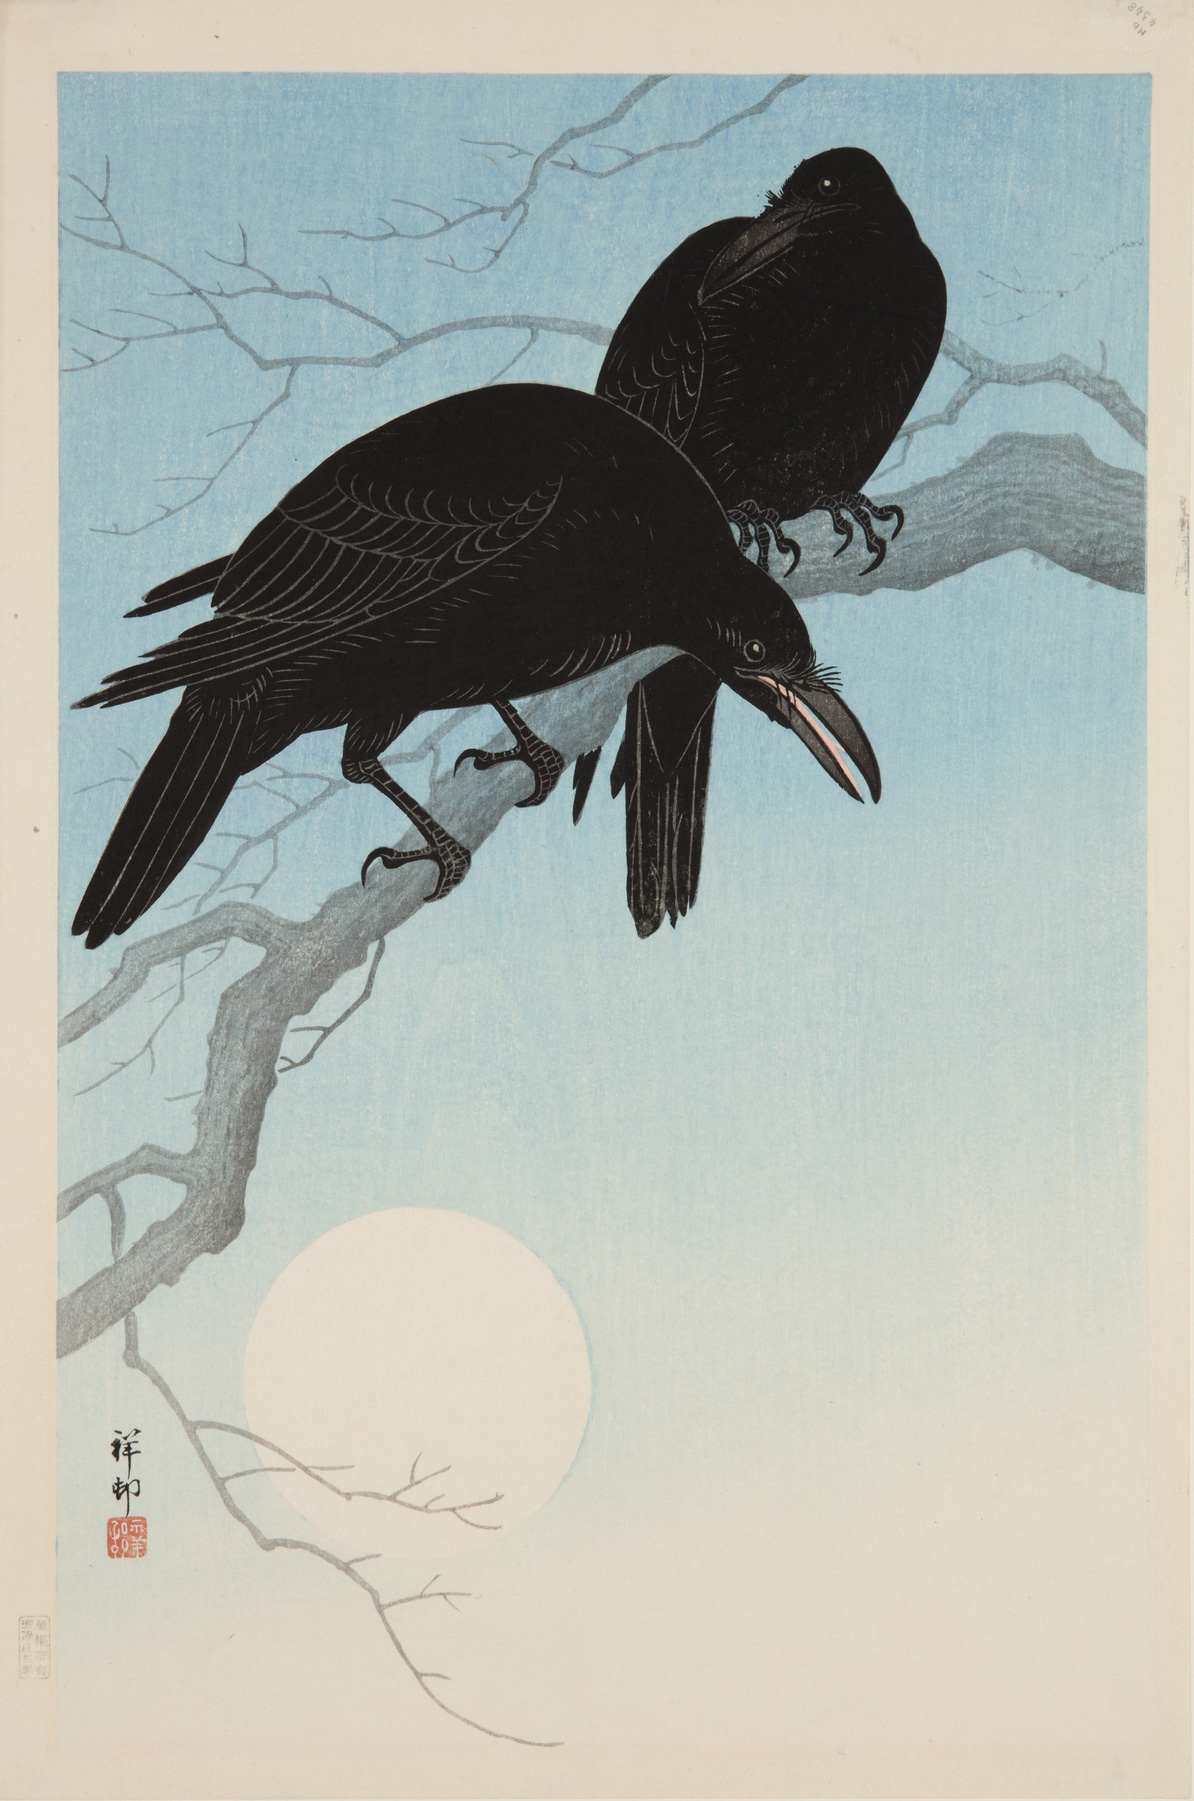 Japanese print of two black crows sat on a bare branch with the full moon shining below.